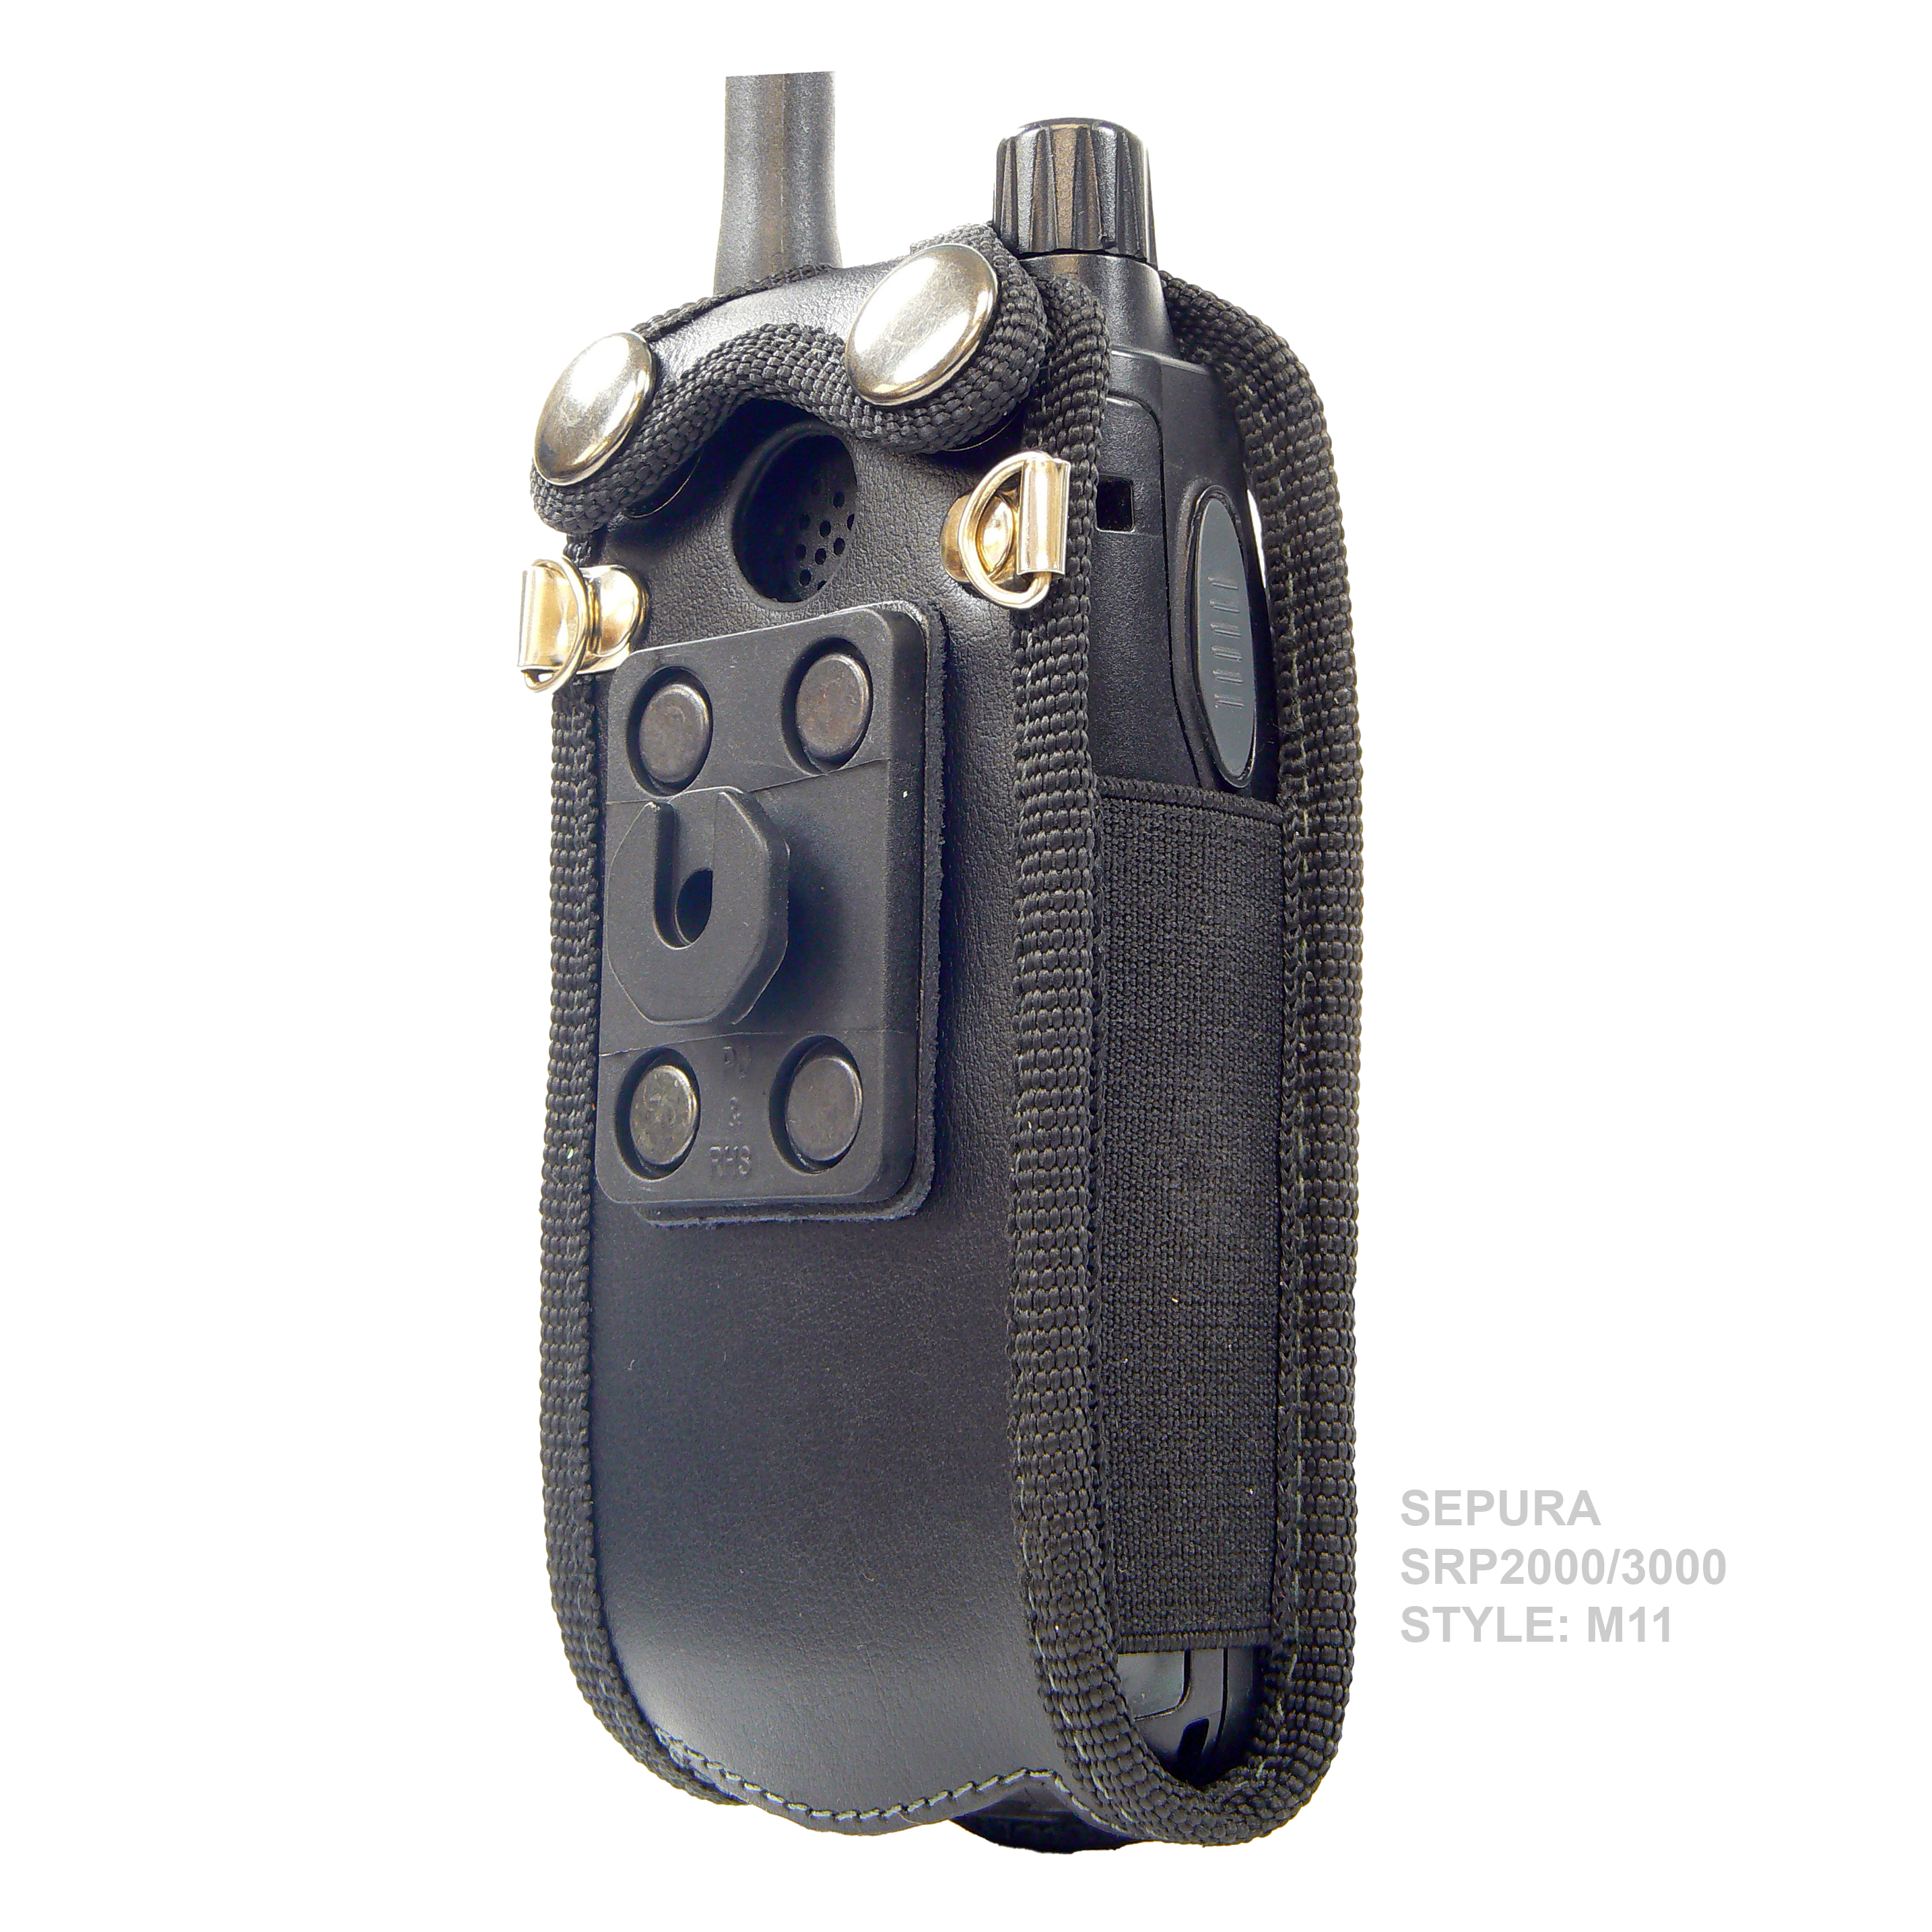 Sepura SRP3000 Tetra Radio Case leather with Click-On